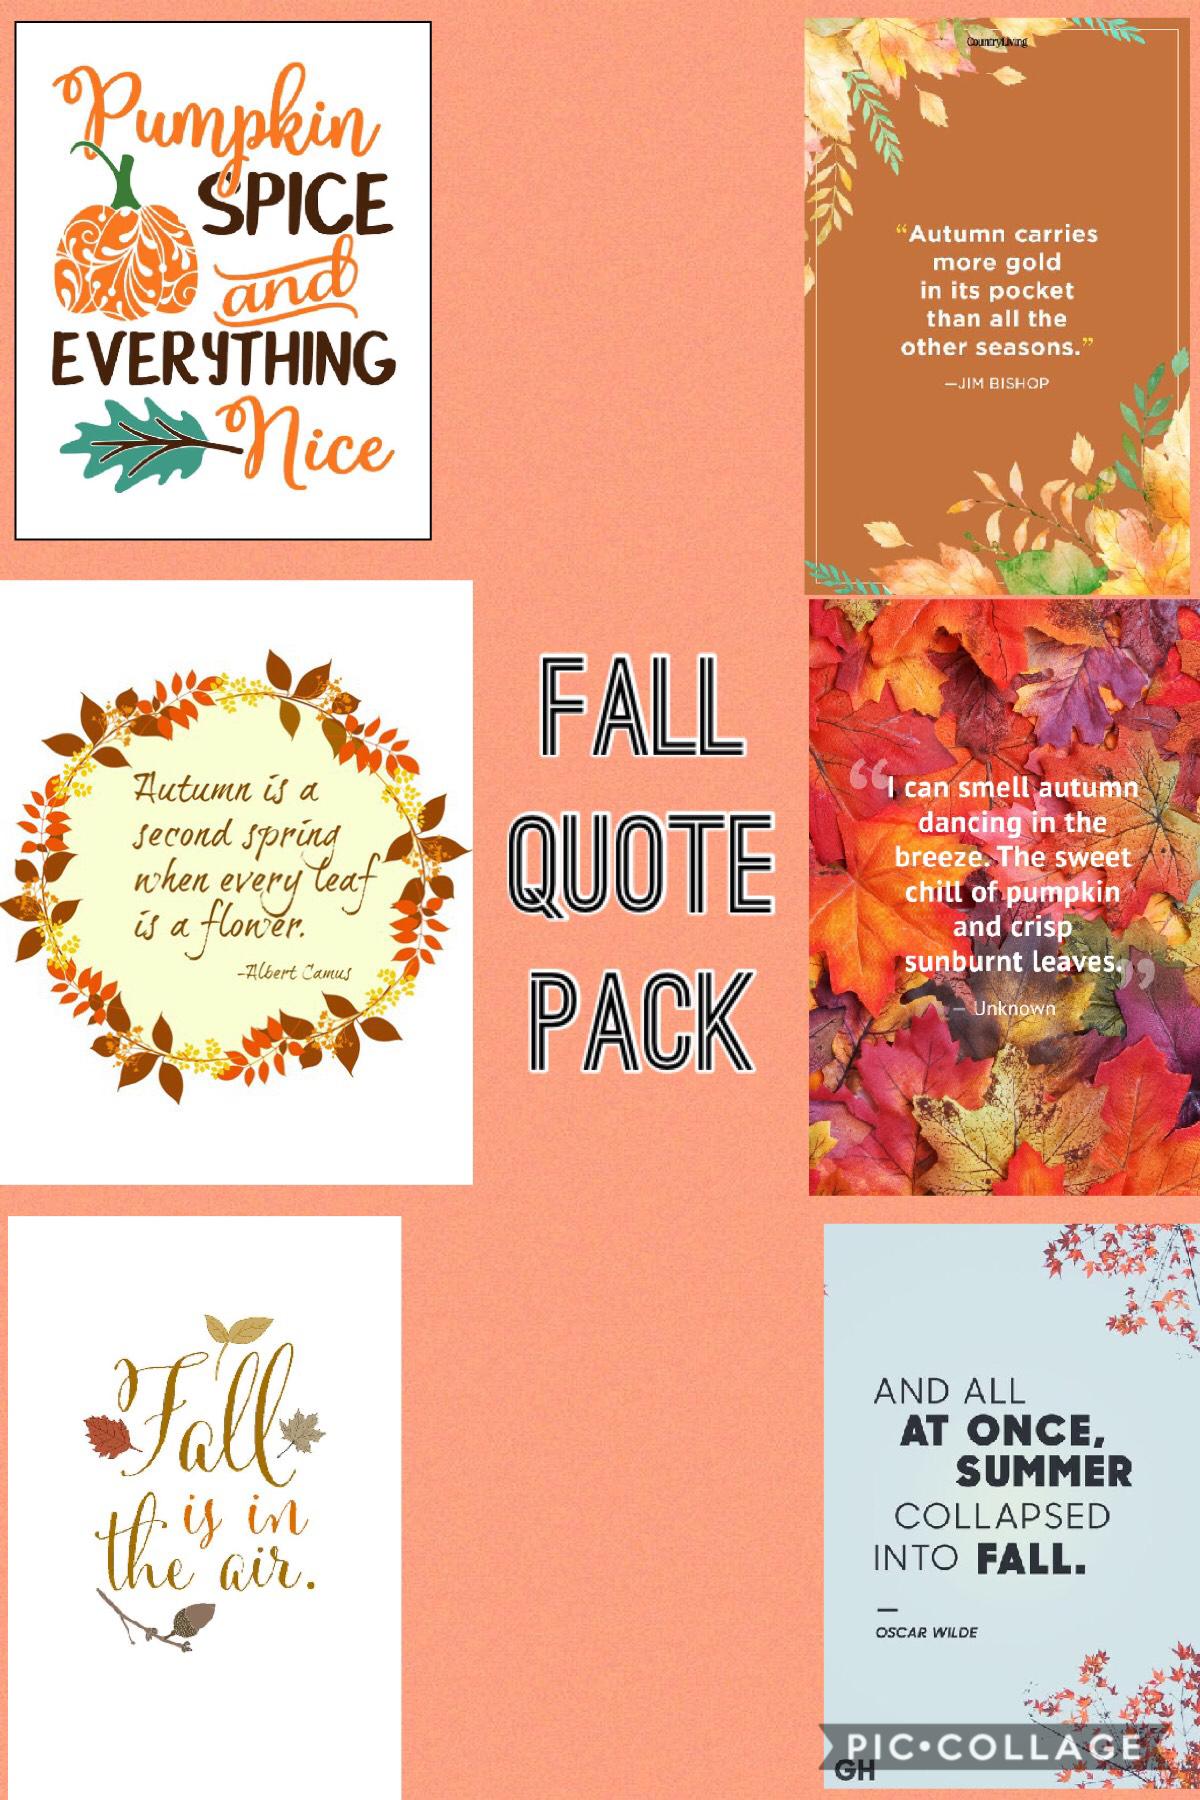 Fall Quote Pack #2 !! Hope y’all like it! Just tap on the collage to collect the quotes or take a screenshot 🎉🎈 THANK YOU SOOO MUCH FOR 200 FOLLOWERS!! 🥳🥳